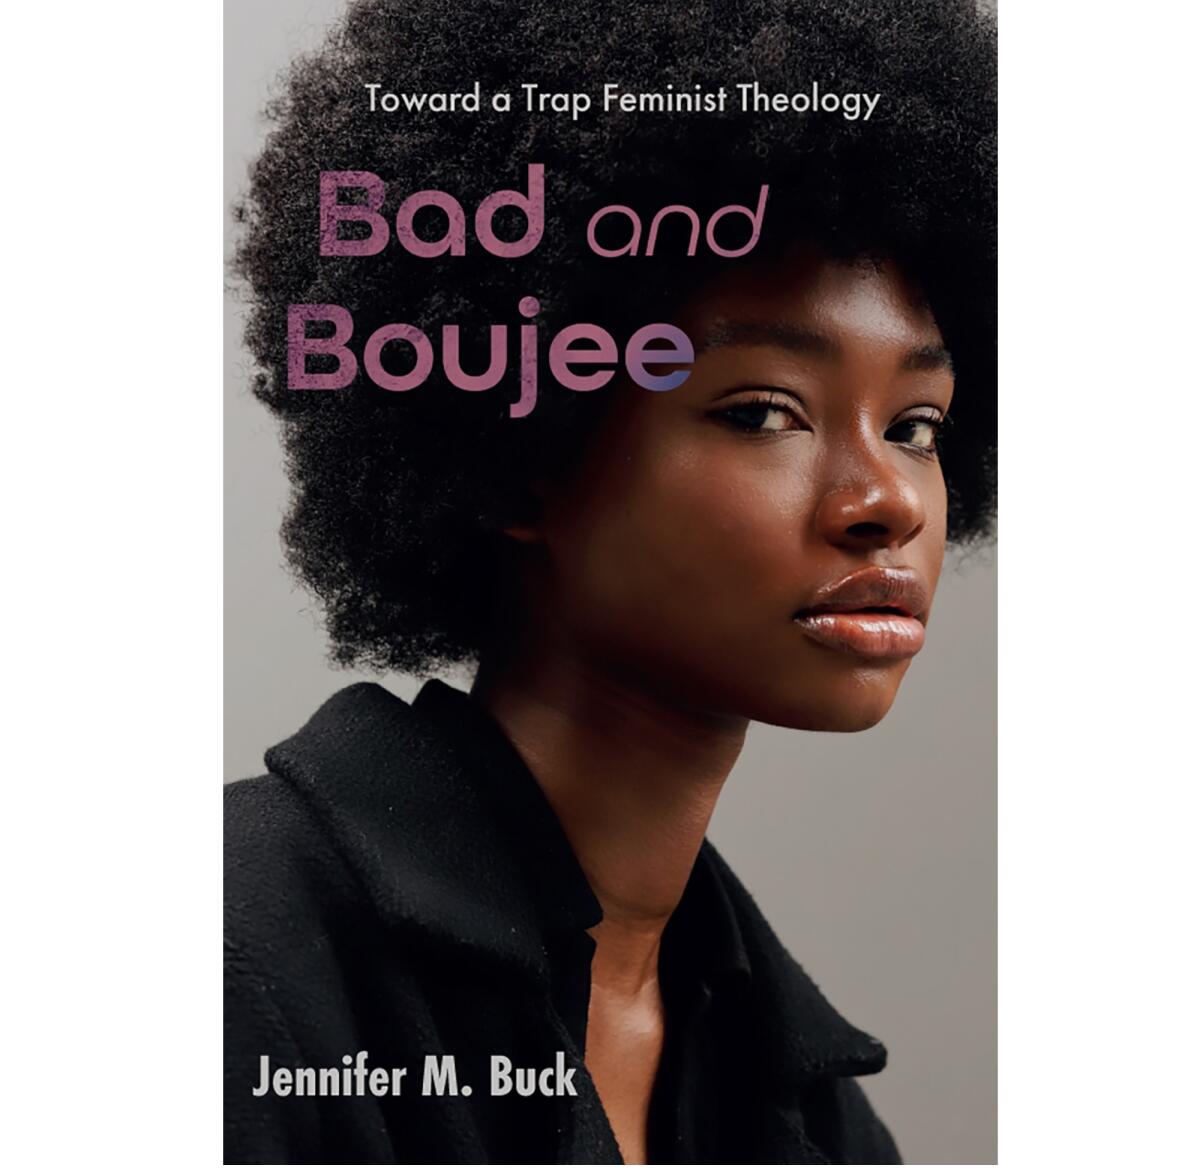 The cover of the book "Bad and Boujee: Toward a Trap Feminist Theology" 